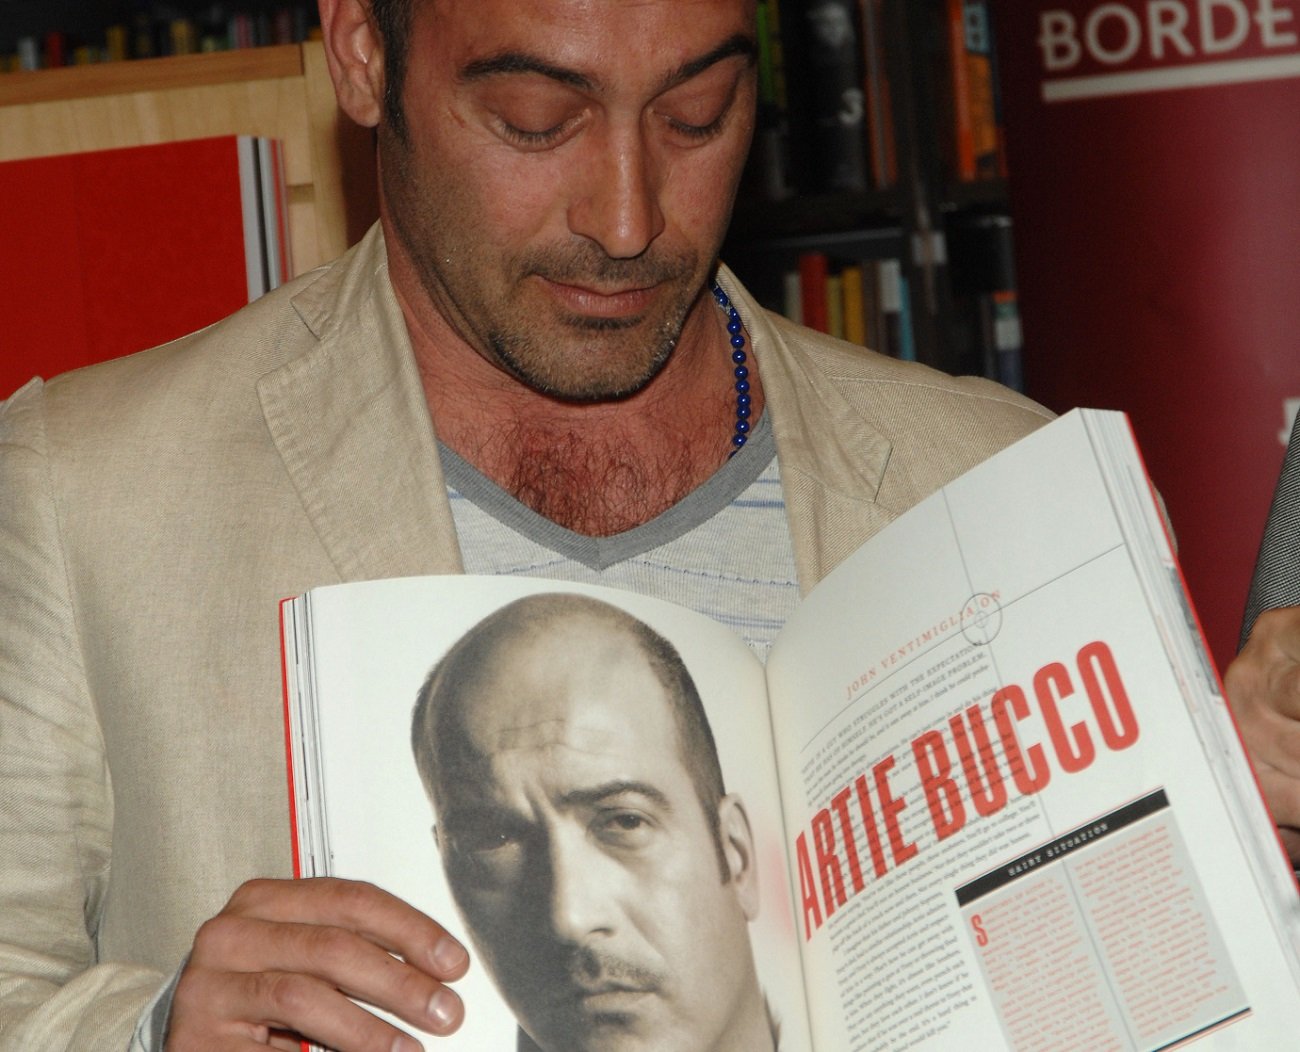 'Sopranos' star John Ventimiglia posing with a book featuring his character